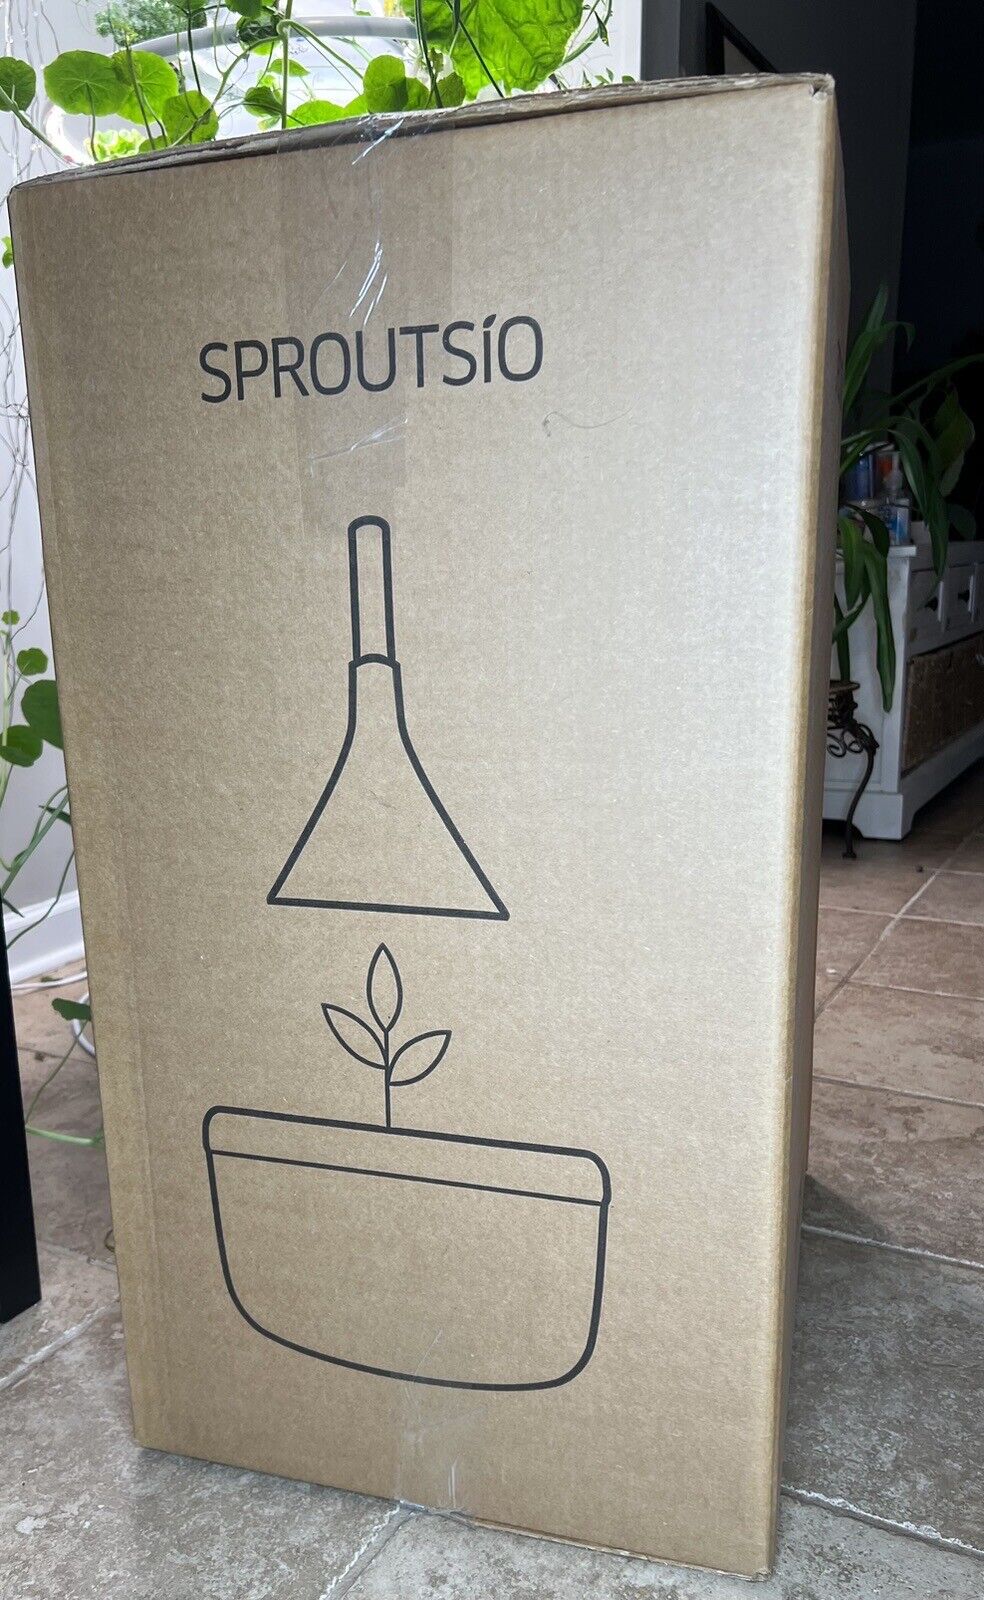 NEW Hydroponic Indoor Growing System Smart Garden by SPROUTSIO